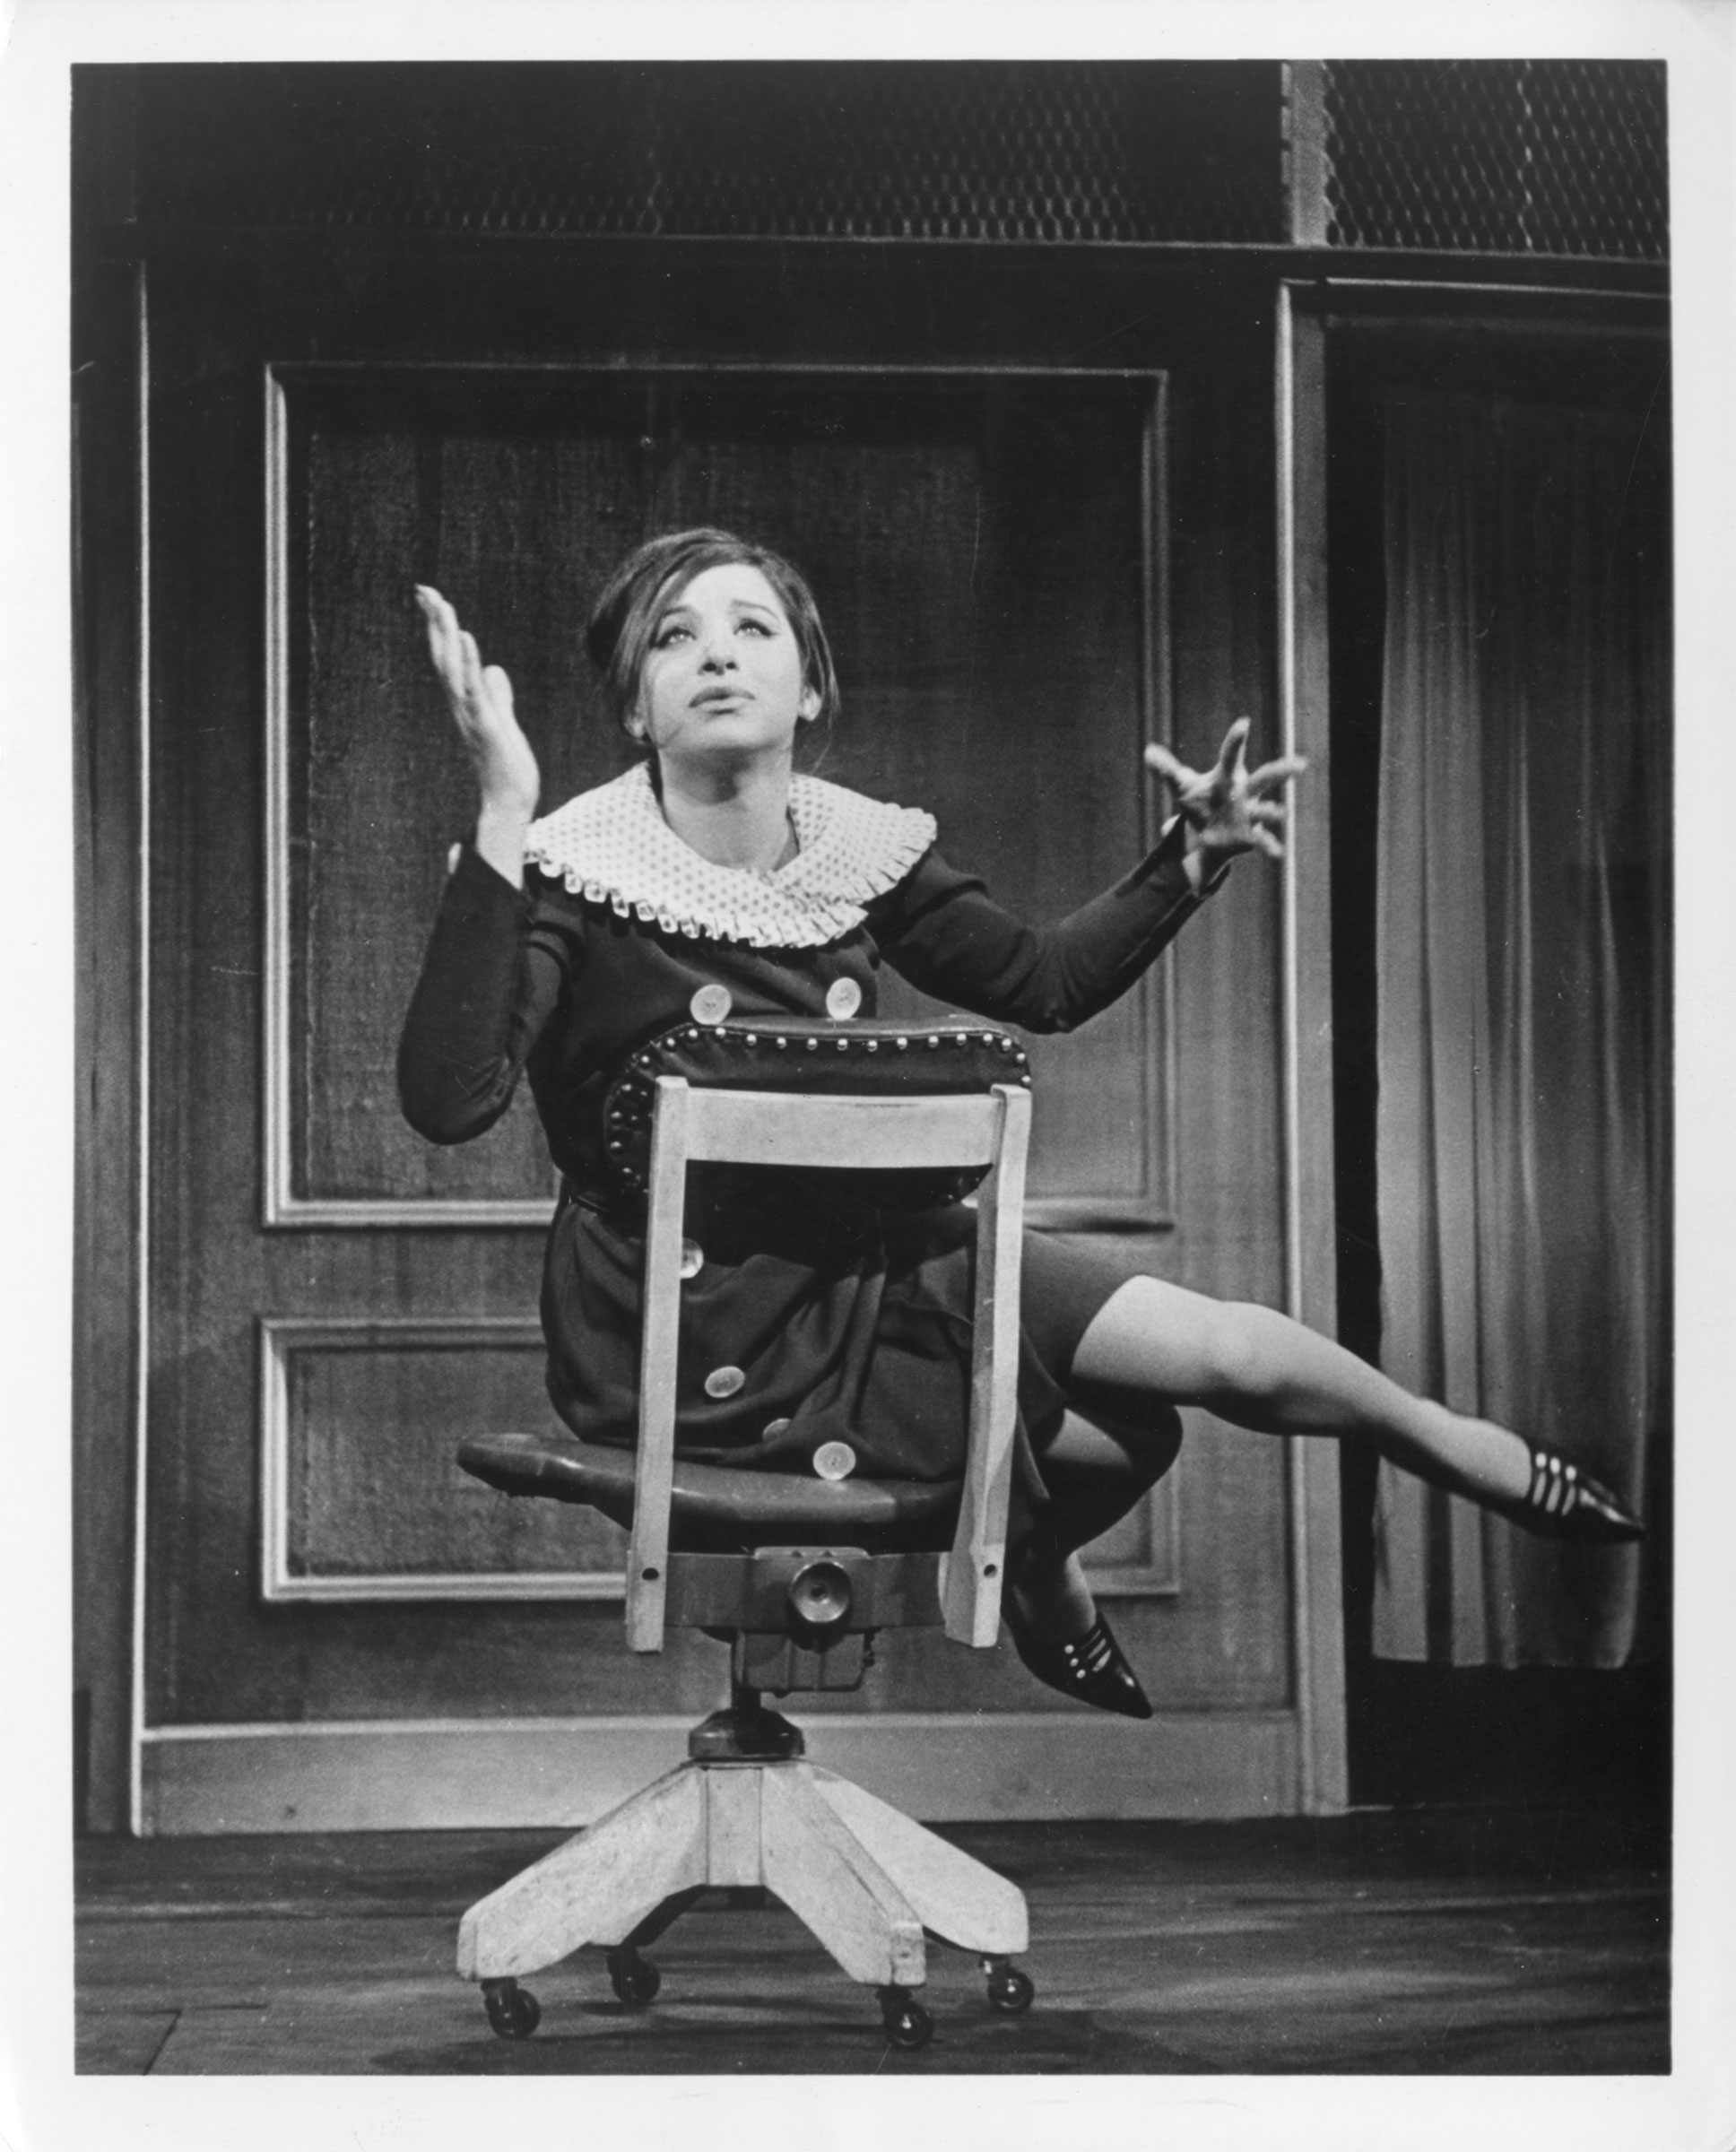 Barbra Streisand in the production of “I Can Get It for You Wholesale” in 1962.